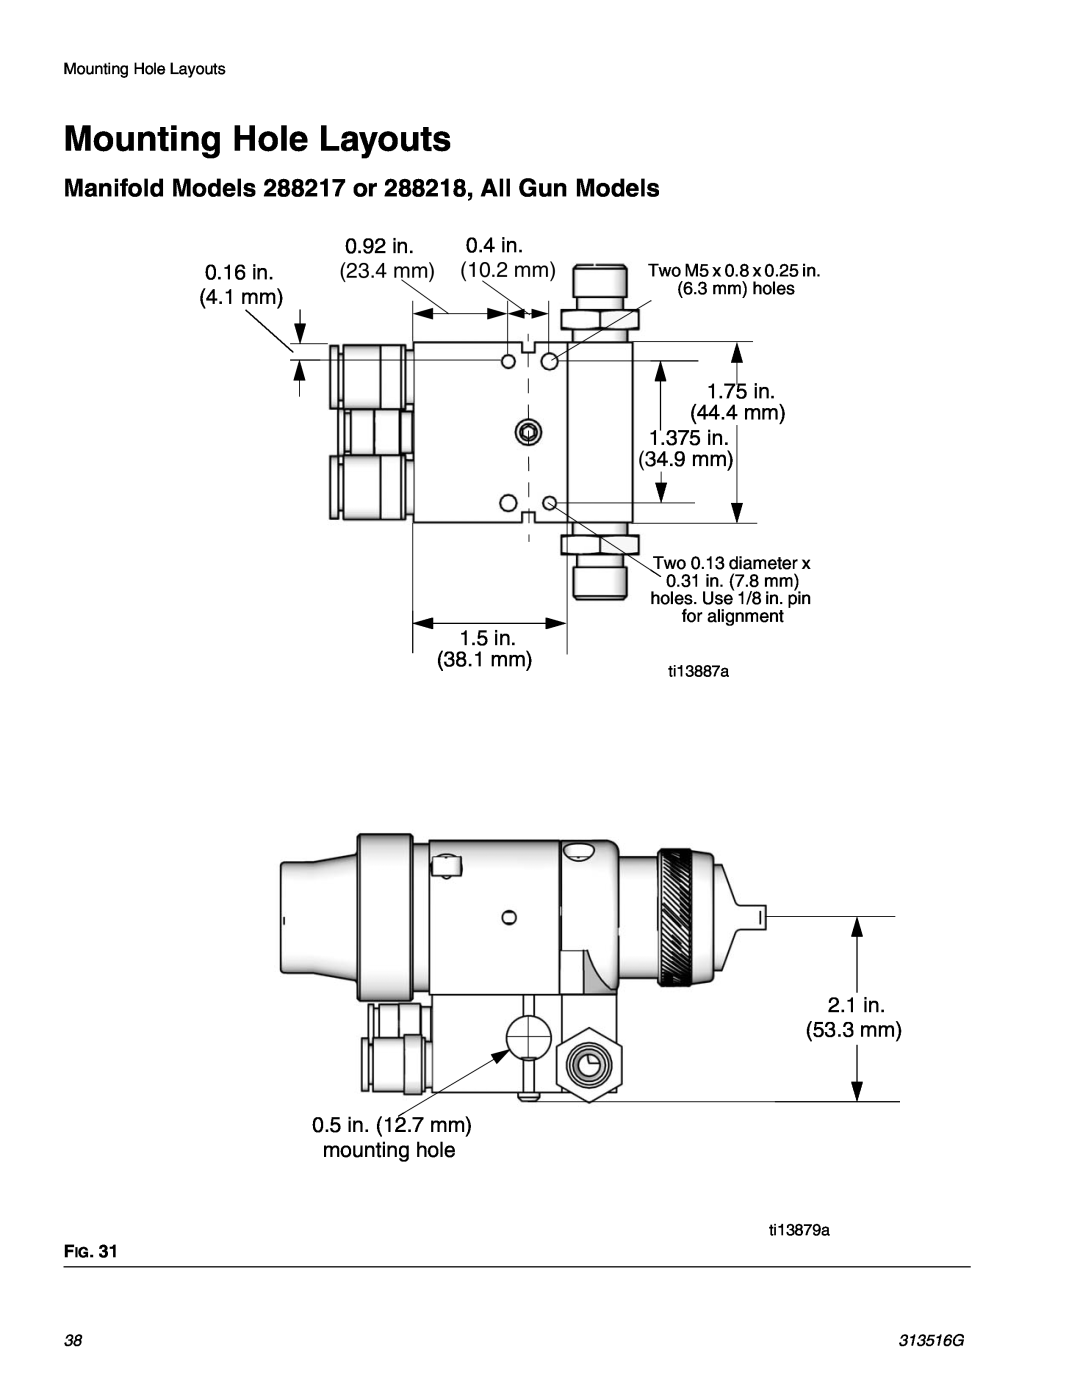 Graco ti13585a Mounting Hole Layouts, Manifold Models 288217 or 288218, All Gun Models, for alignment, ti13887a, ti13879a 